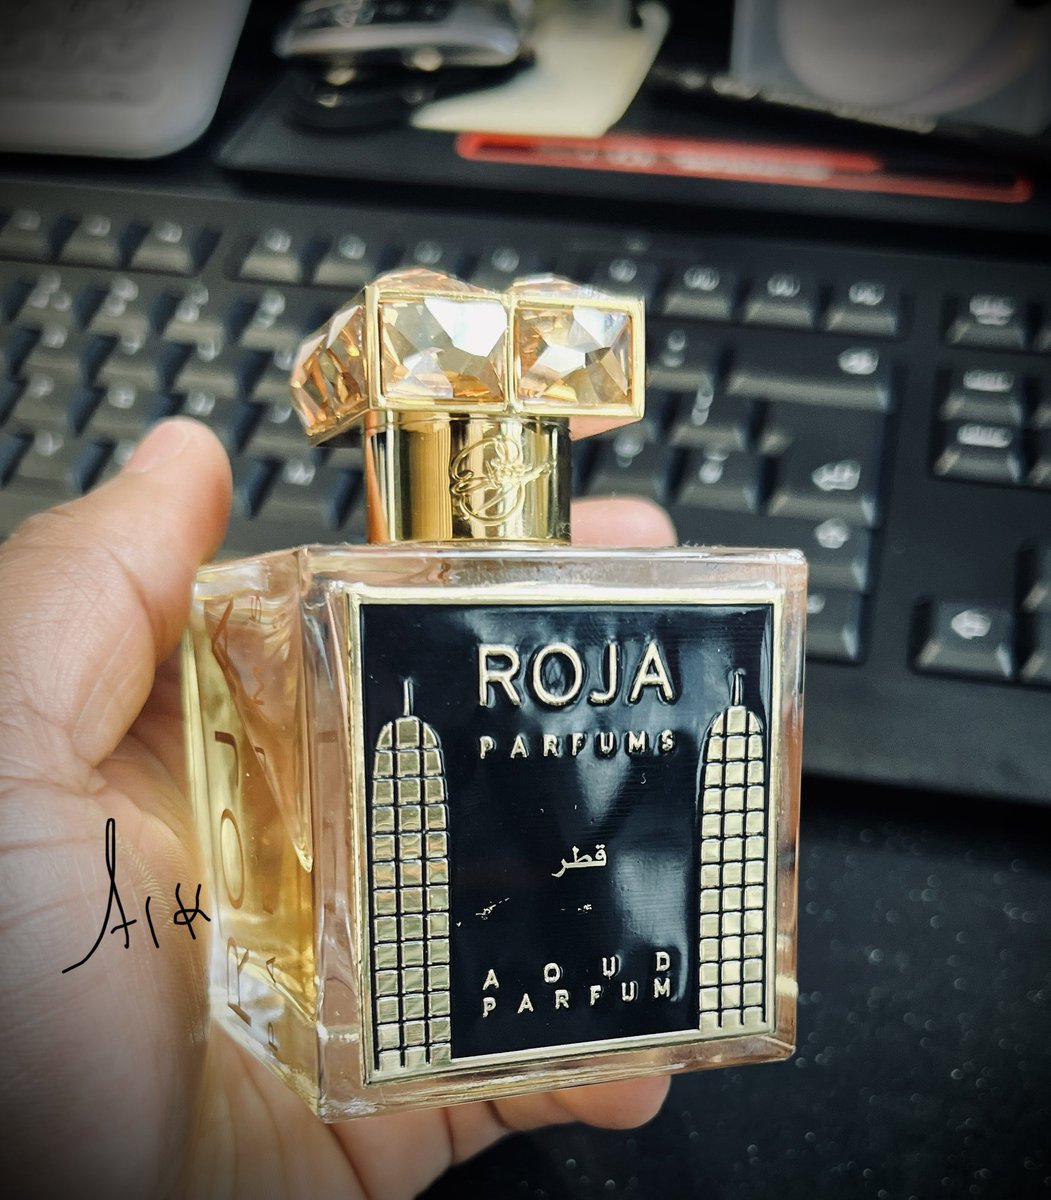 #SOTN #fragrance #fragranceaddict #fragrancelover #rojaparfums #FragHead #fragrancecollection 

Qatar vibes for the night! https://t.co/0Lh9FuoSdW